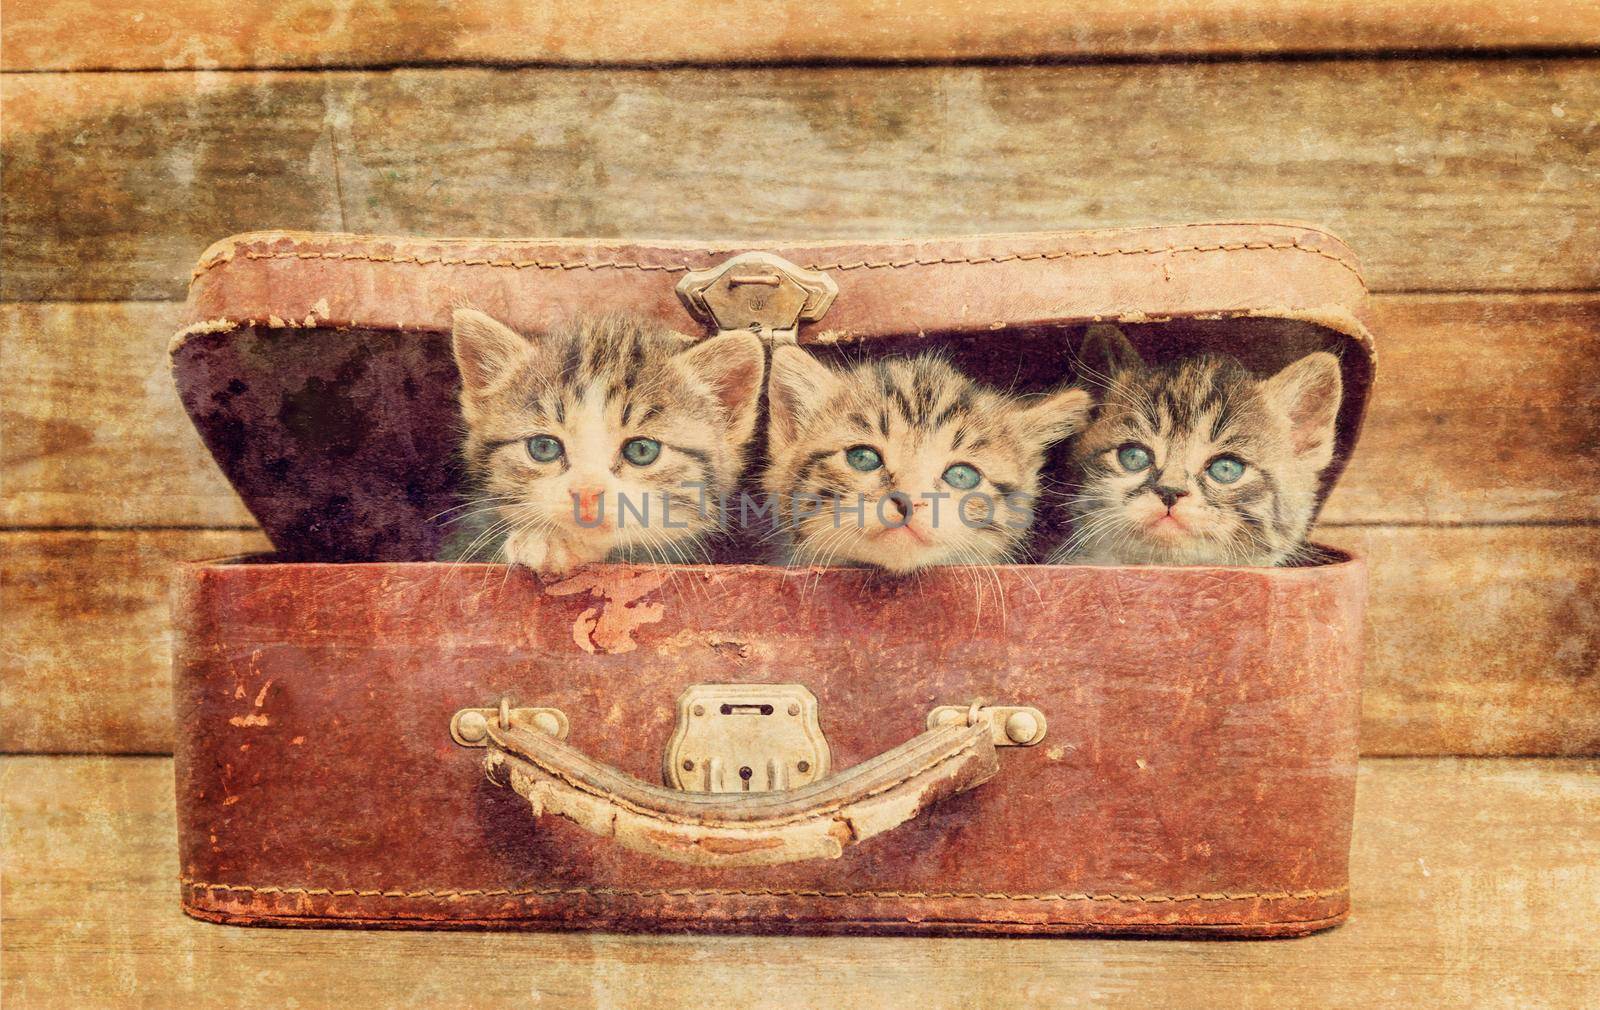 Cute kittens are sitting in vintage suitcase on a wooden background. Vintage image